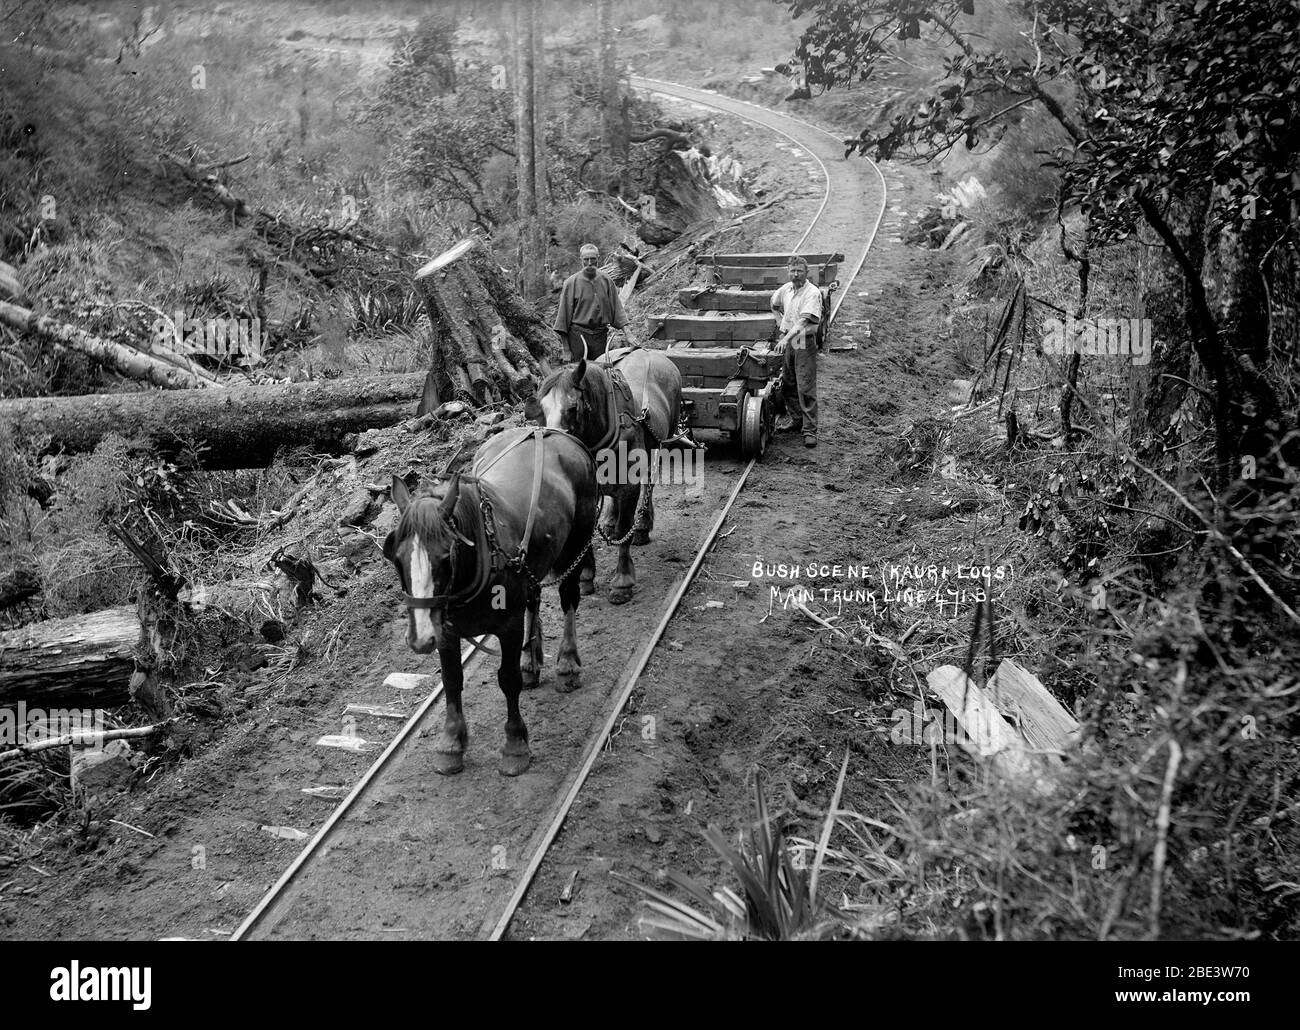 Horses tow an empty wagon used for hauling Kauri logs on a bush railway track in the North Island of New Zealand, circa 1915, by photographer Albert Percy Godber Stock Photo